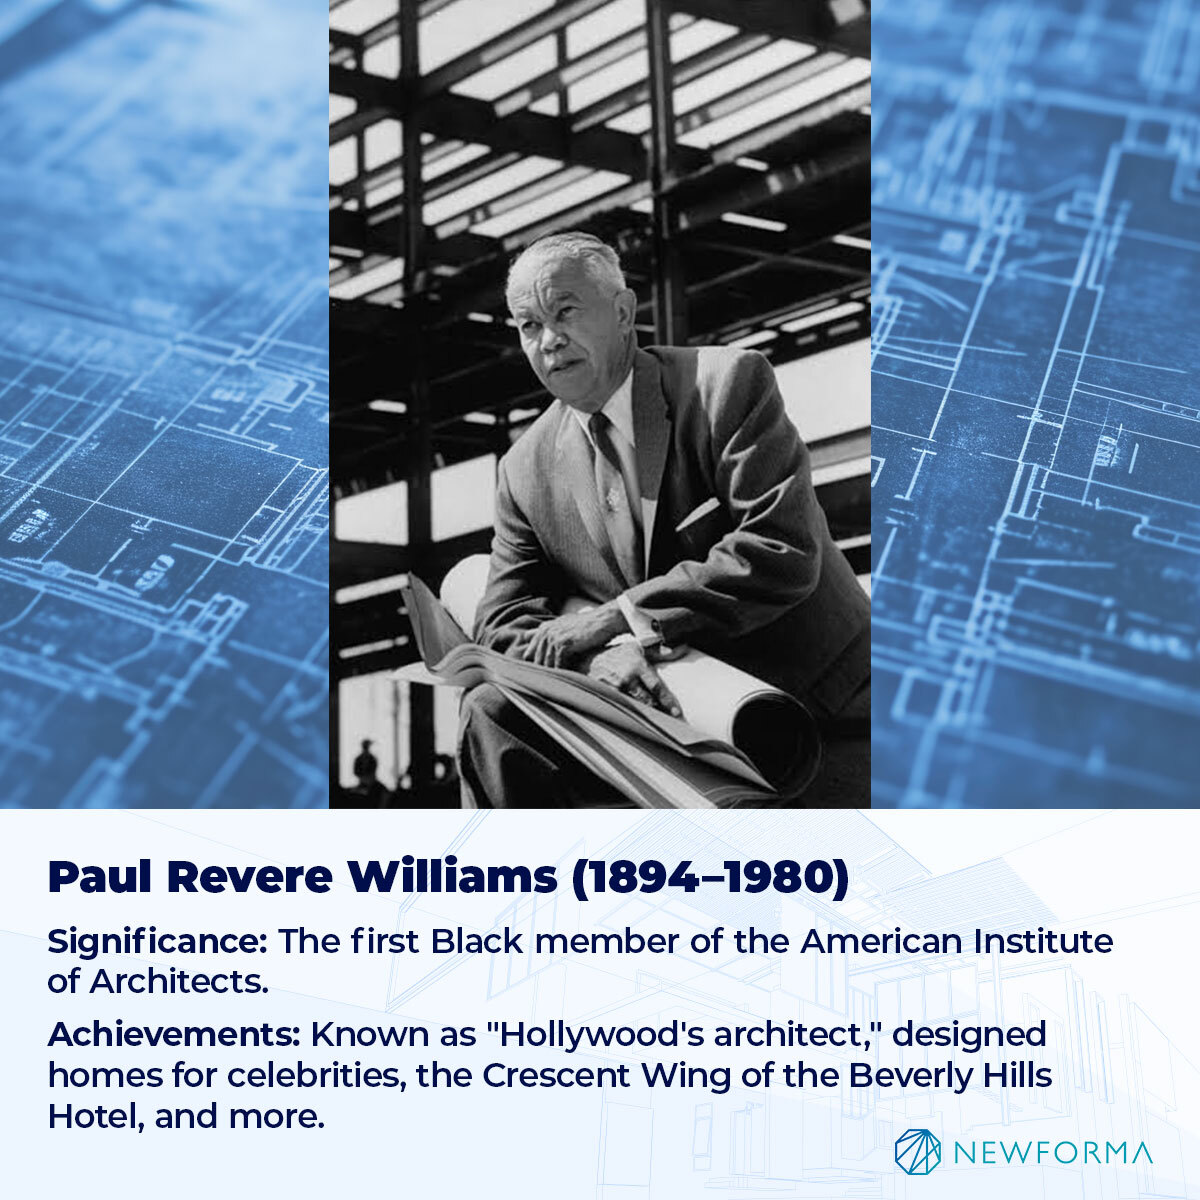 SIGNIFICANCE: THE FIRST BLACK MEMBER OF THE AMERICAN INSTITUTE OF ARCHITECTS. 
ACHIEVEMENTS: KNOWN AS "HOLLYWOOD'S ARCHITECT," DESIGNED HOMES FOR CELEBRITIES, THE CRESCENT WING OF THE BEVERLY HILLS HOTEL, AND MORE. 
